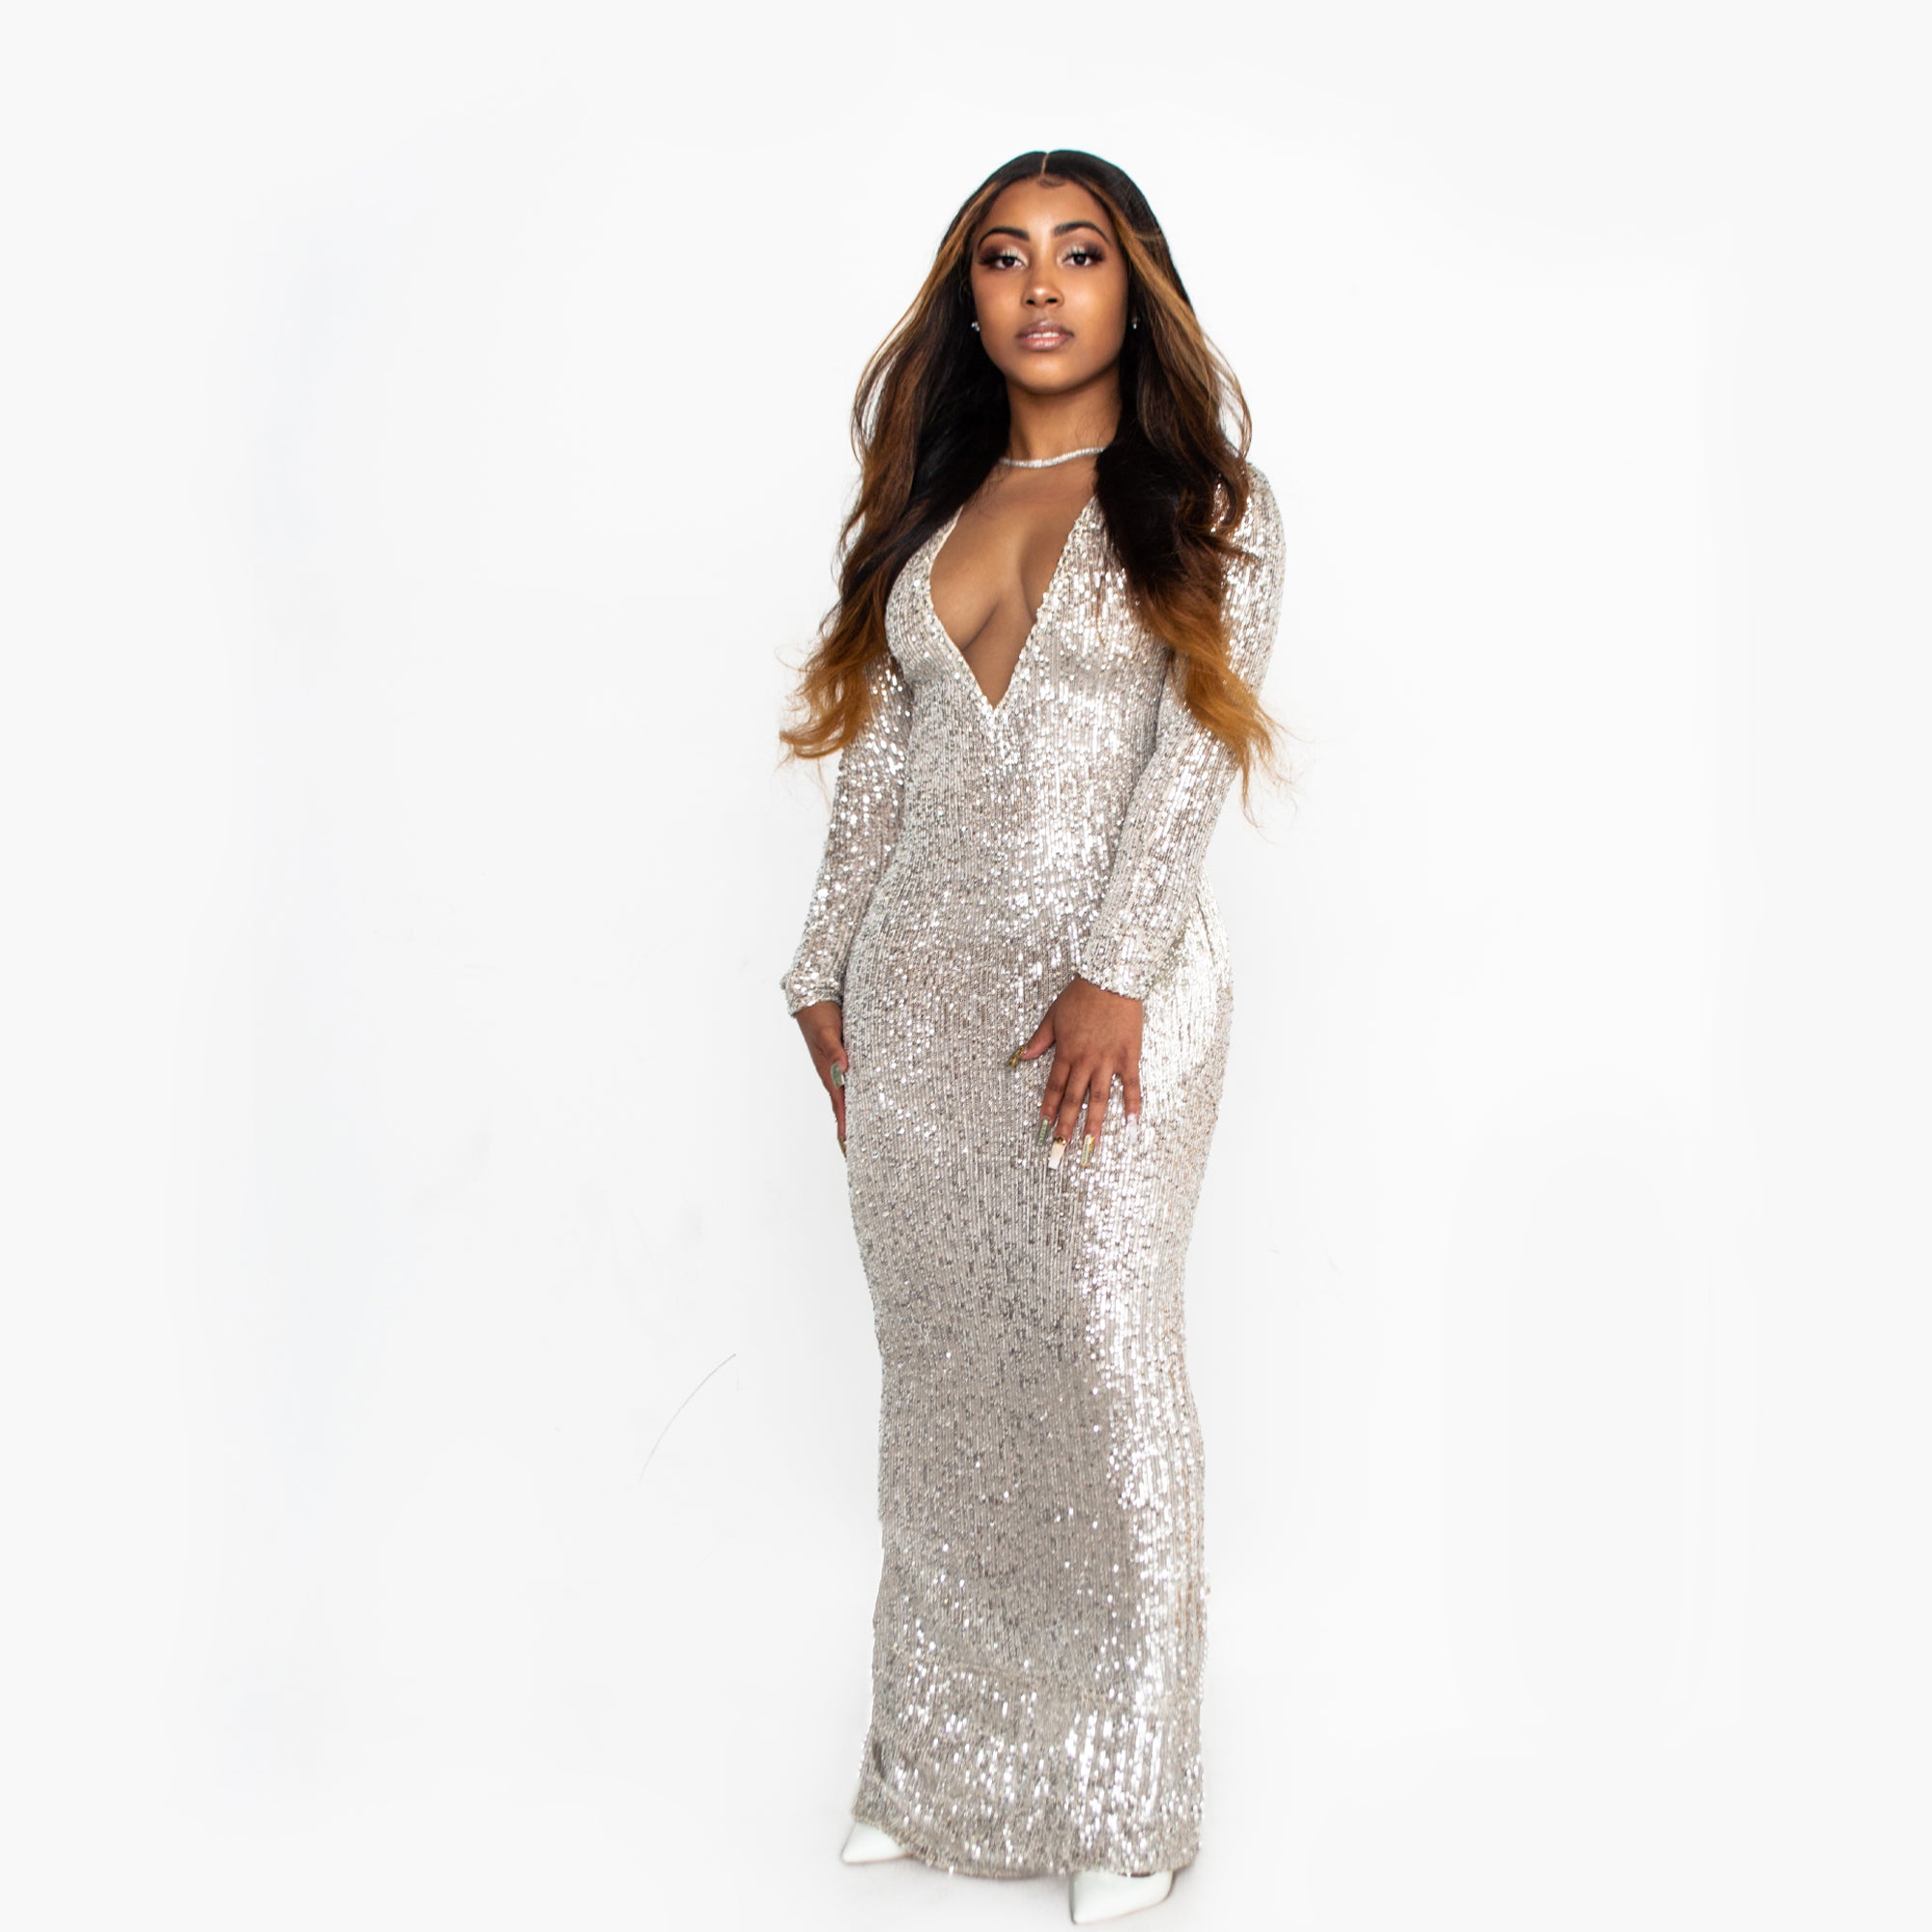 The Kyra Gown